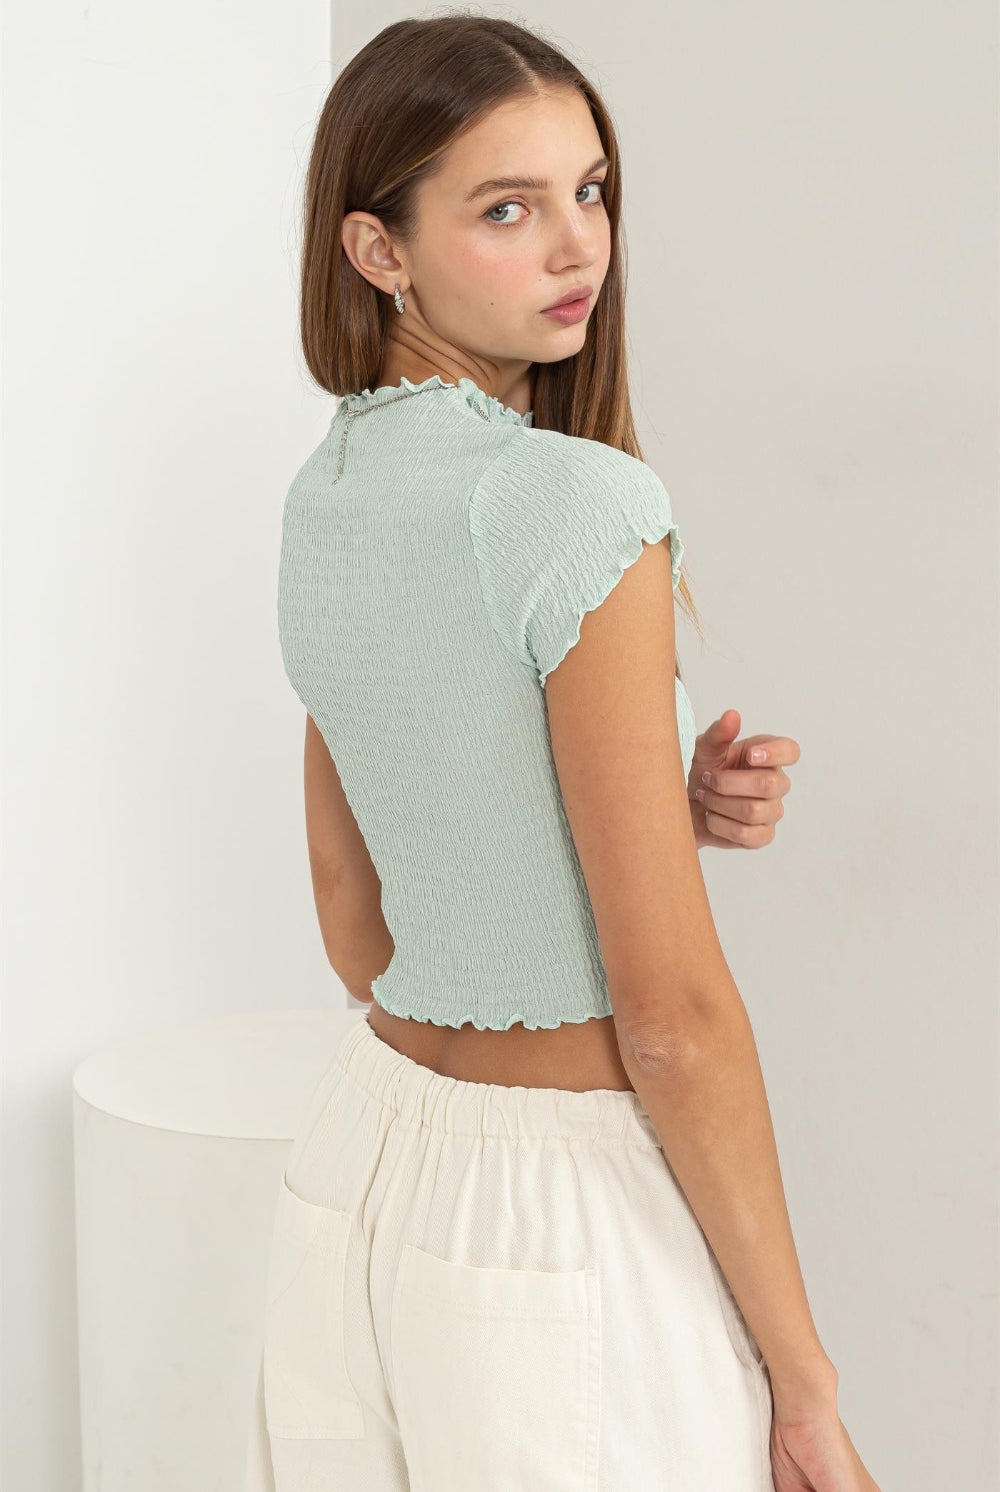 A woman models a light blue HYFVE Lettuce Hem Crop Top, paired with casual white drawstring pants. The top features short sleeves and a textured, ruffled hemline that adds a playful touch to the fitted silhouette. The image is part of an Instagram post for GemThreads Boutique to showcase their latest summer fashion item, inviting viewers to visit their website and shop the collection.